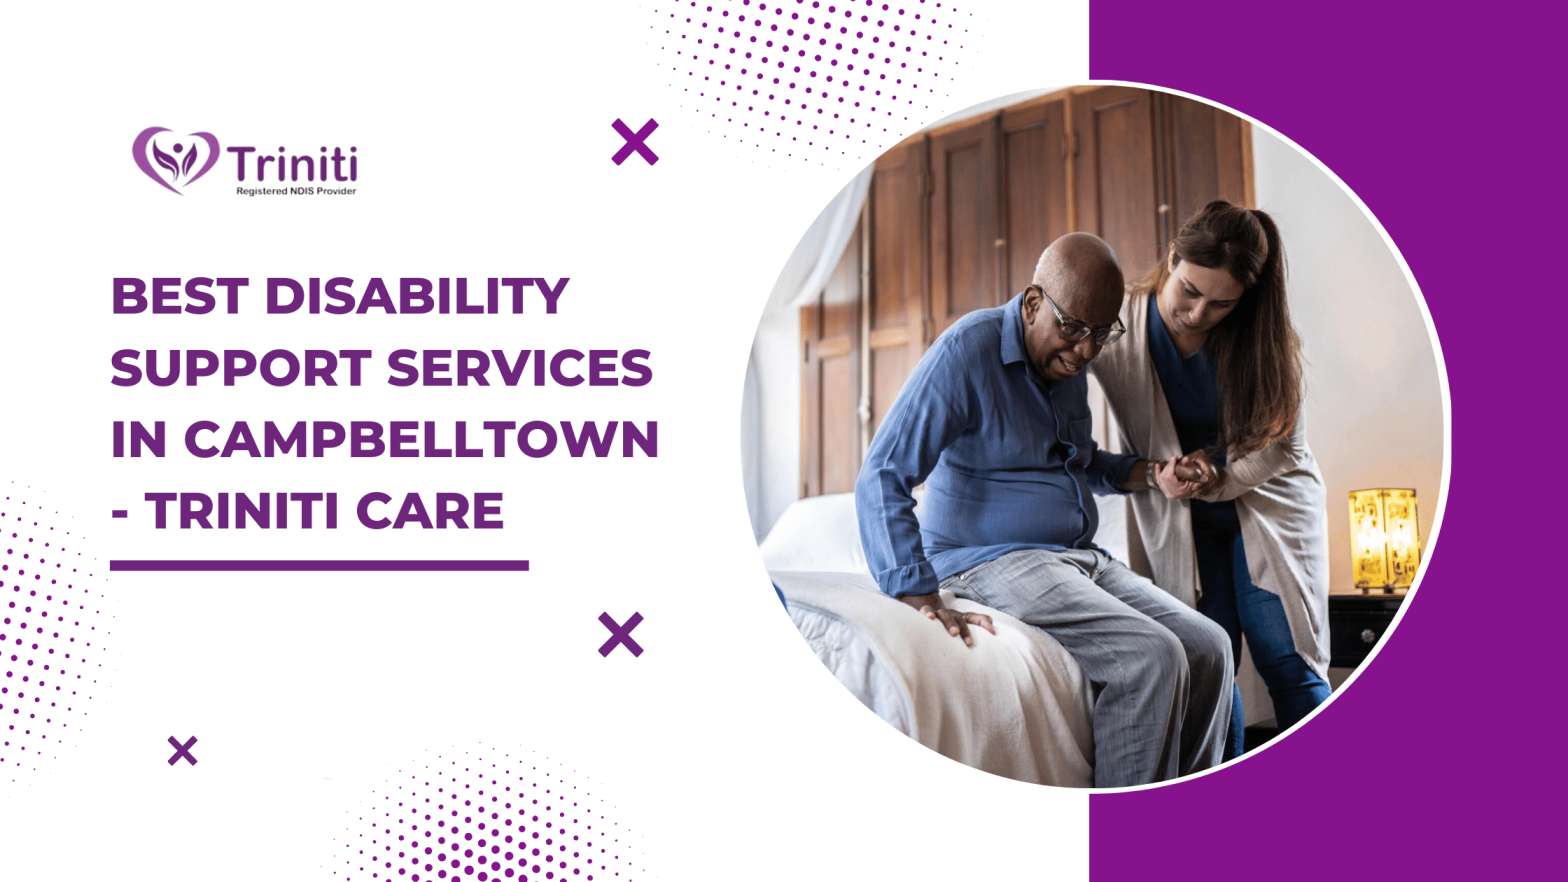 Best Disability Support Services in Campbelltown – Triniti Care